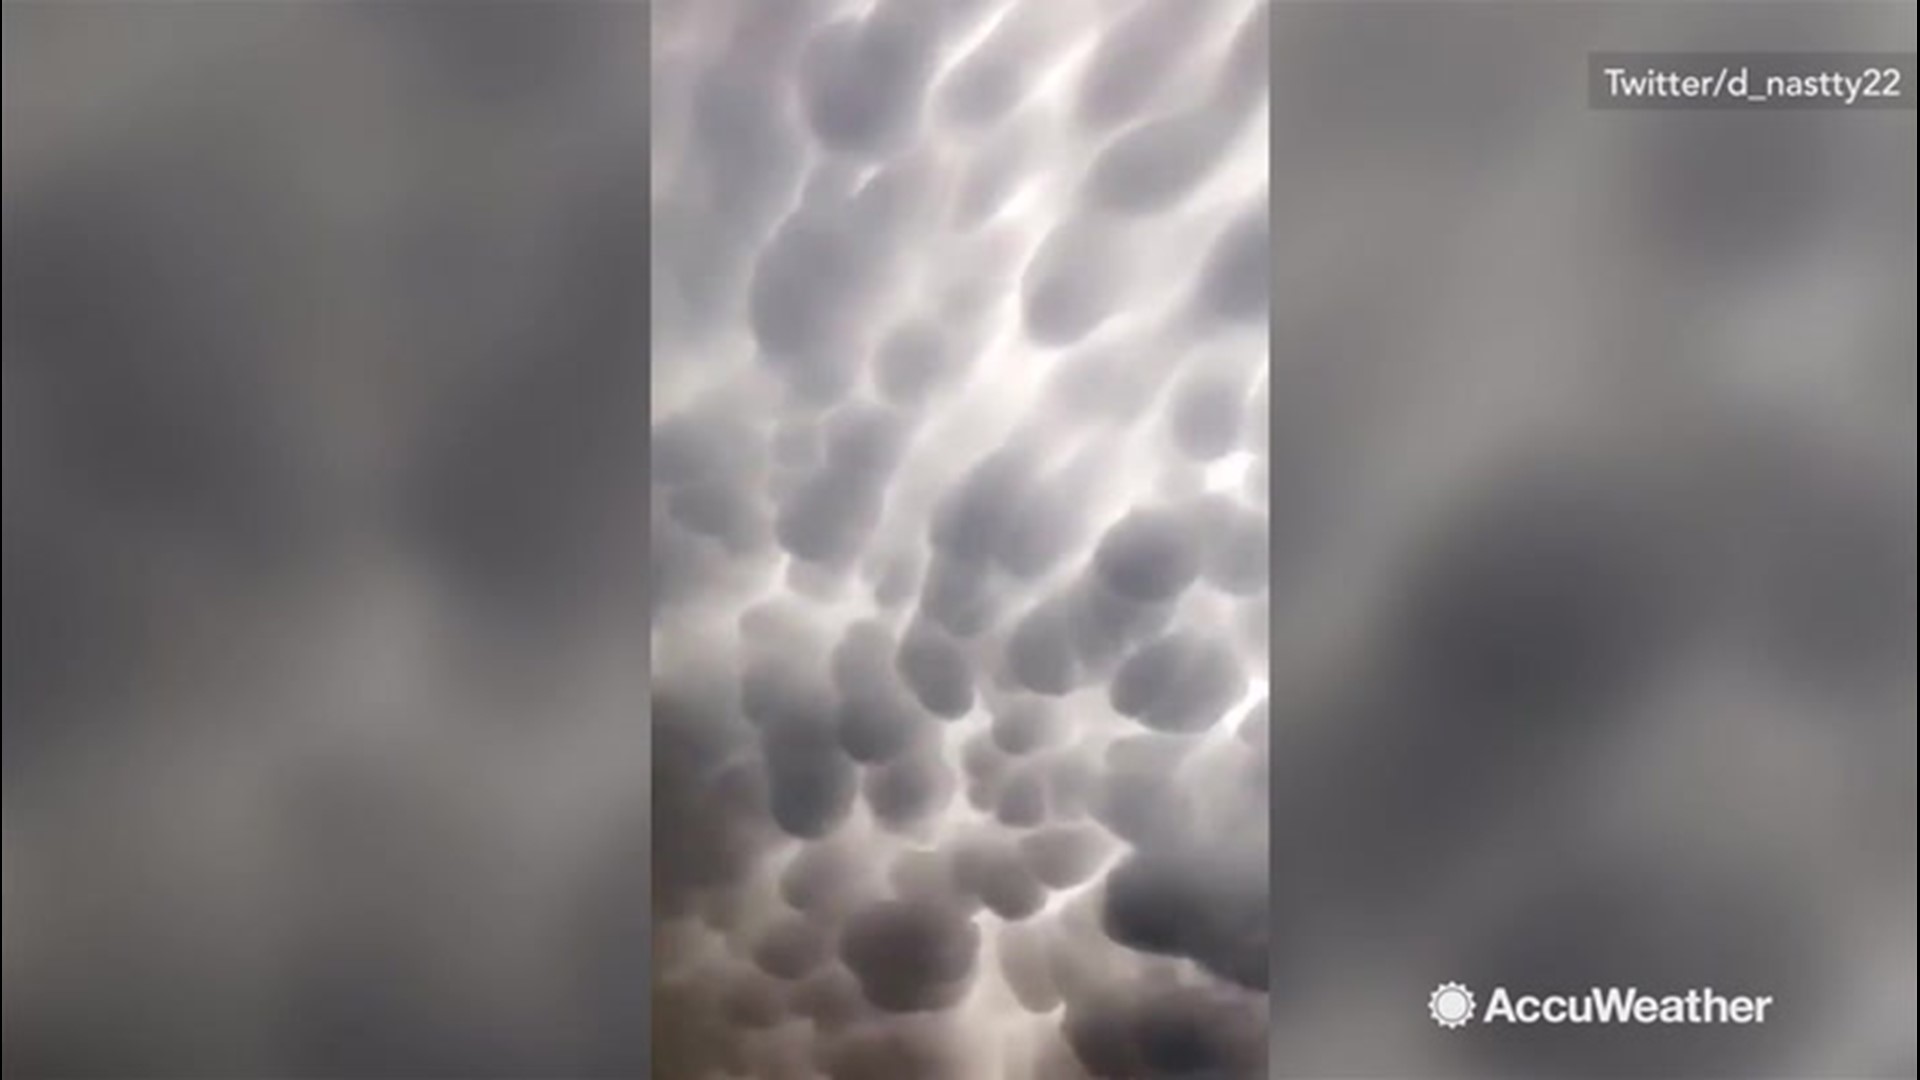 A resident of Lubbock, Texas caught sight of Mammatus clouds on May 23.